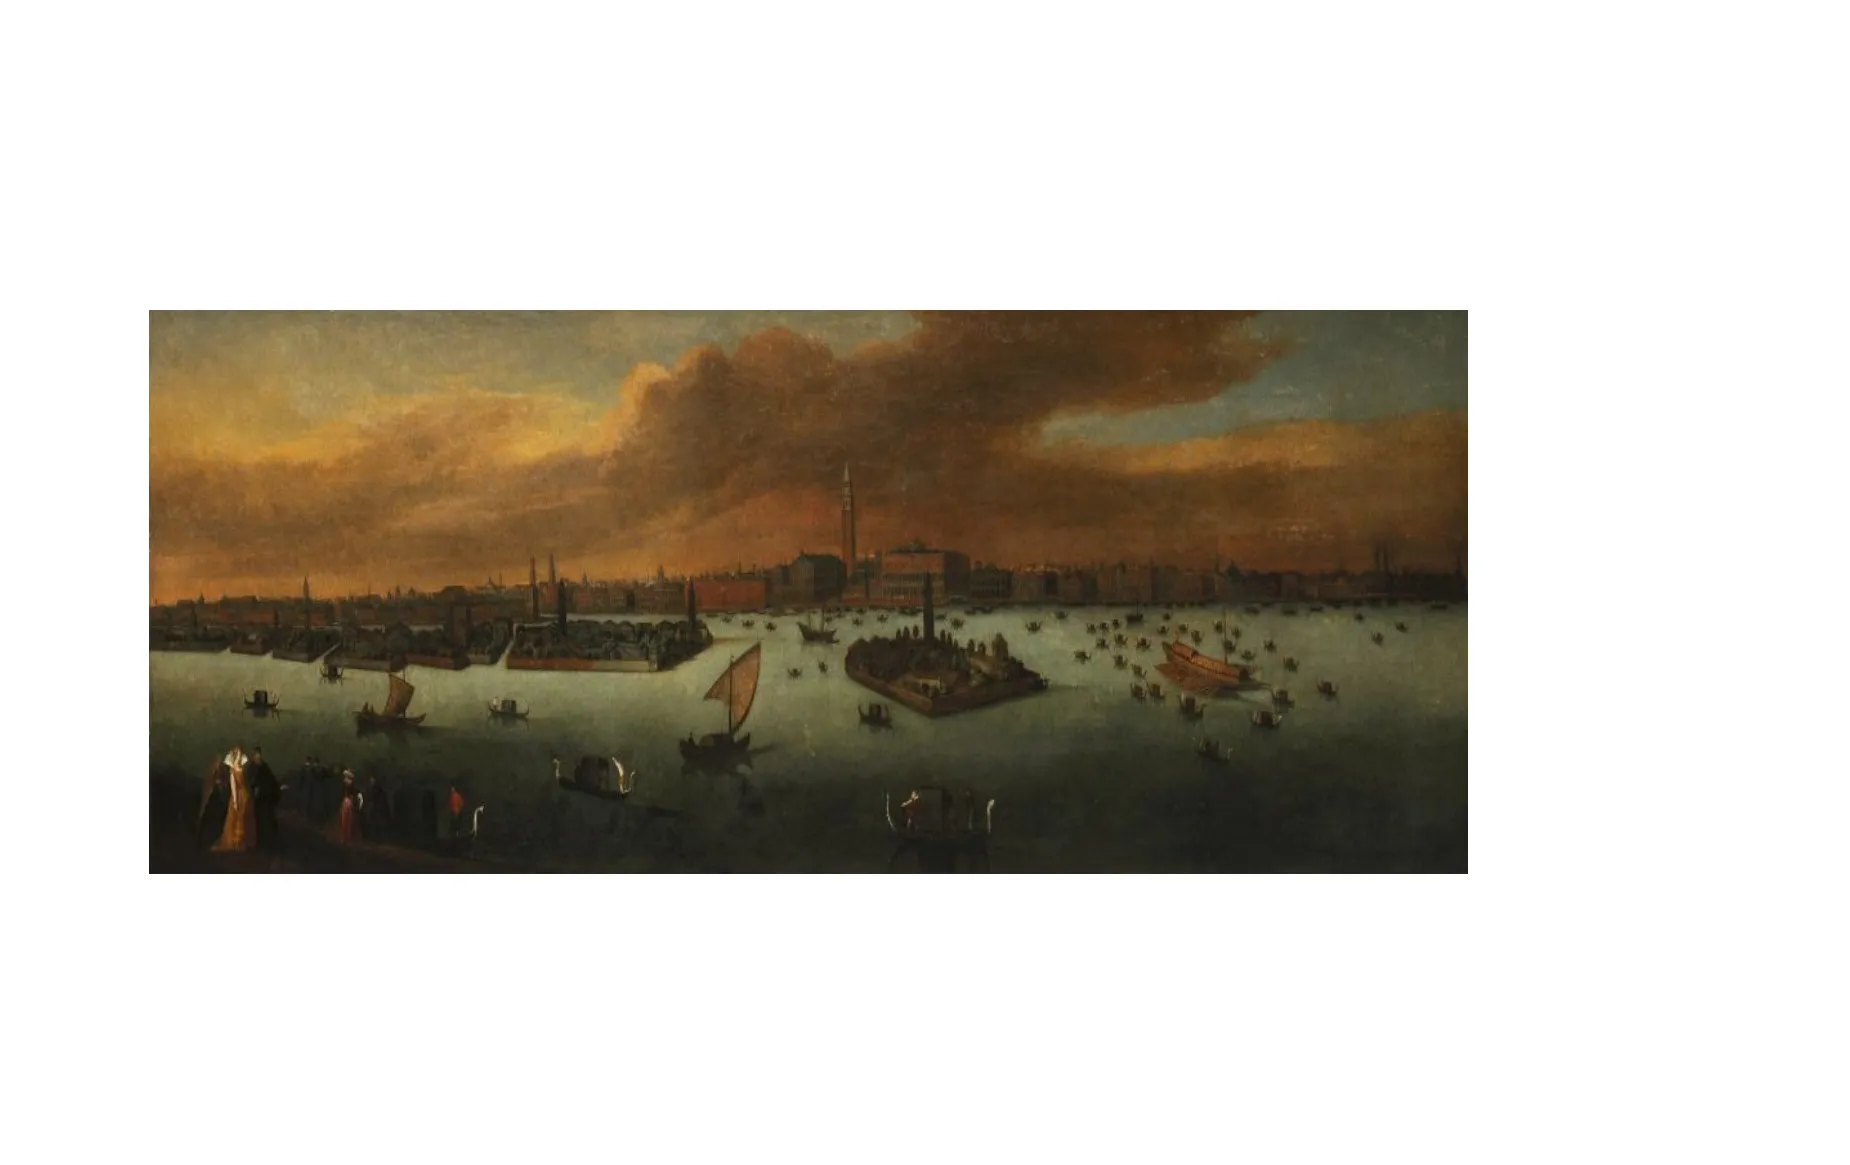 An image from the 'A view of Venice' exhibition